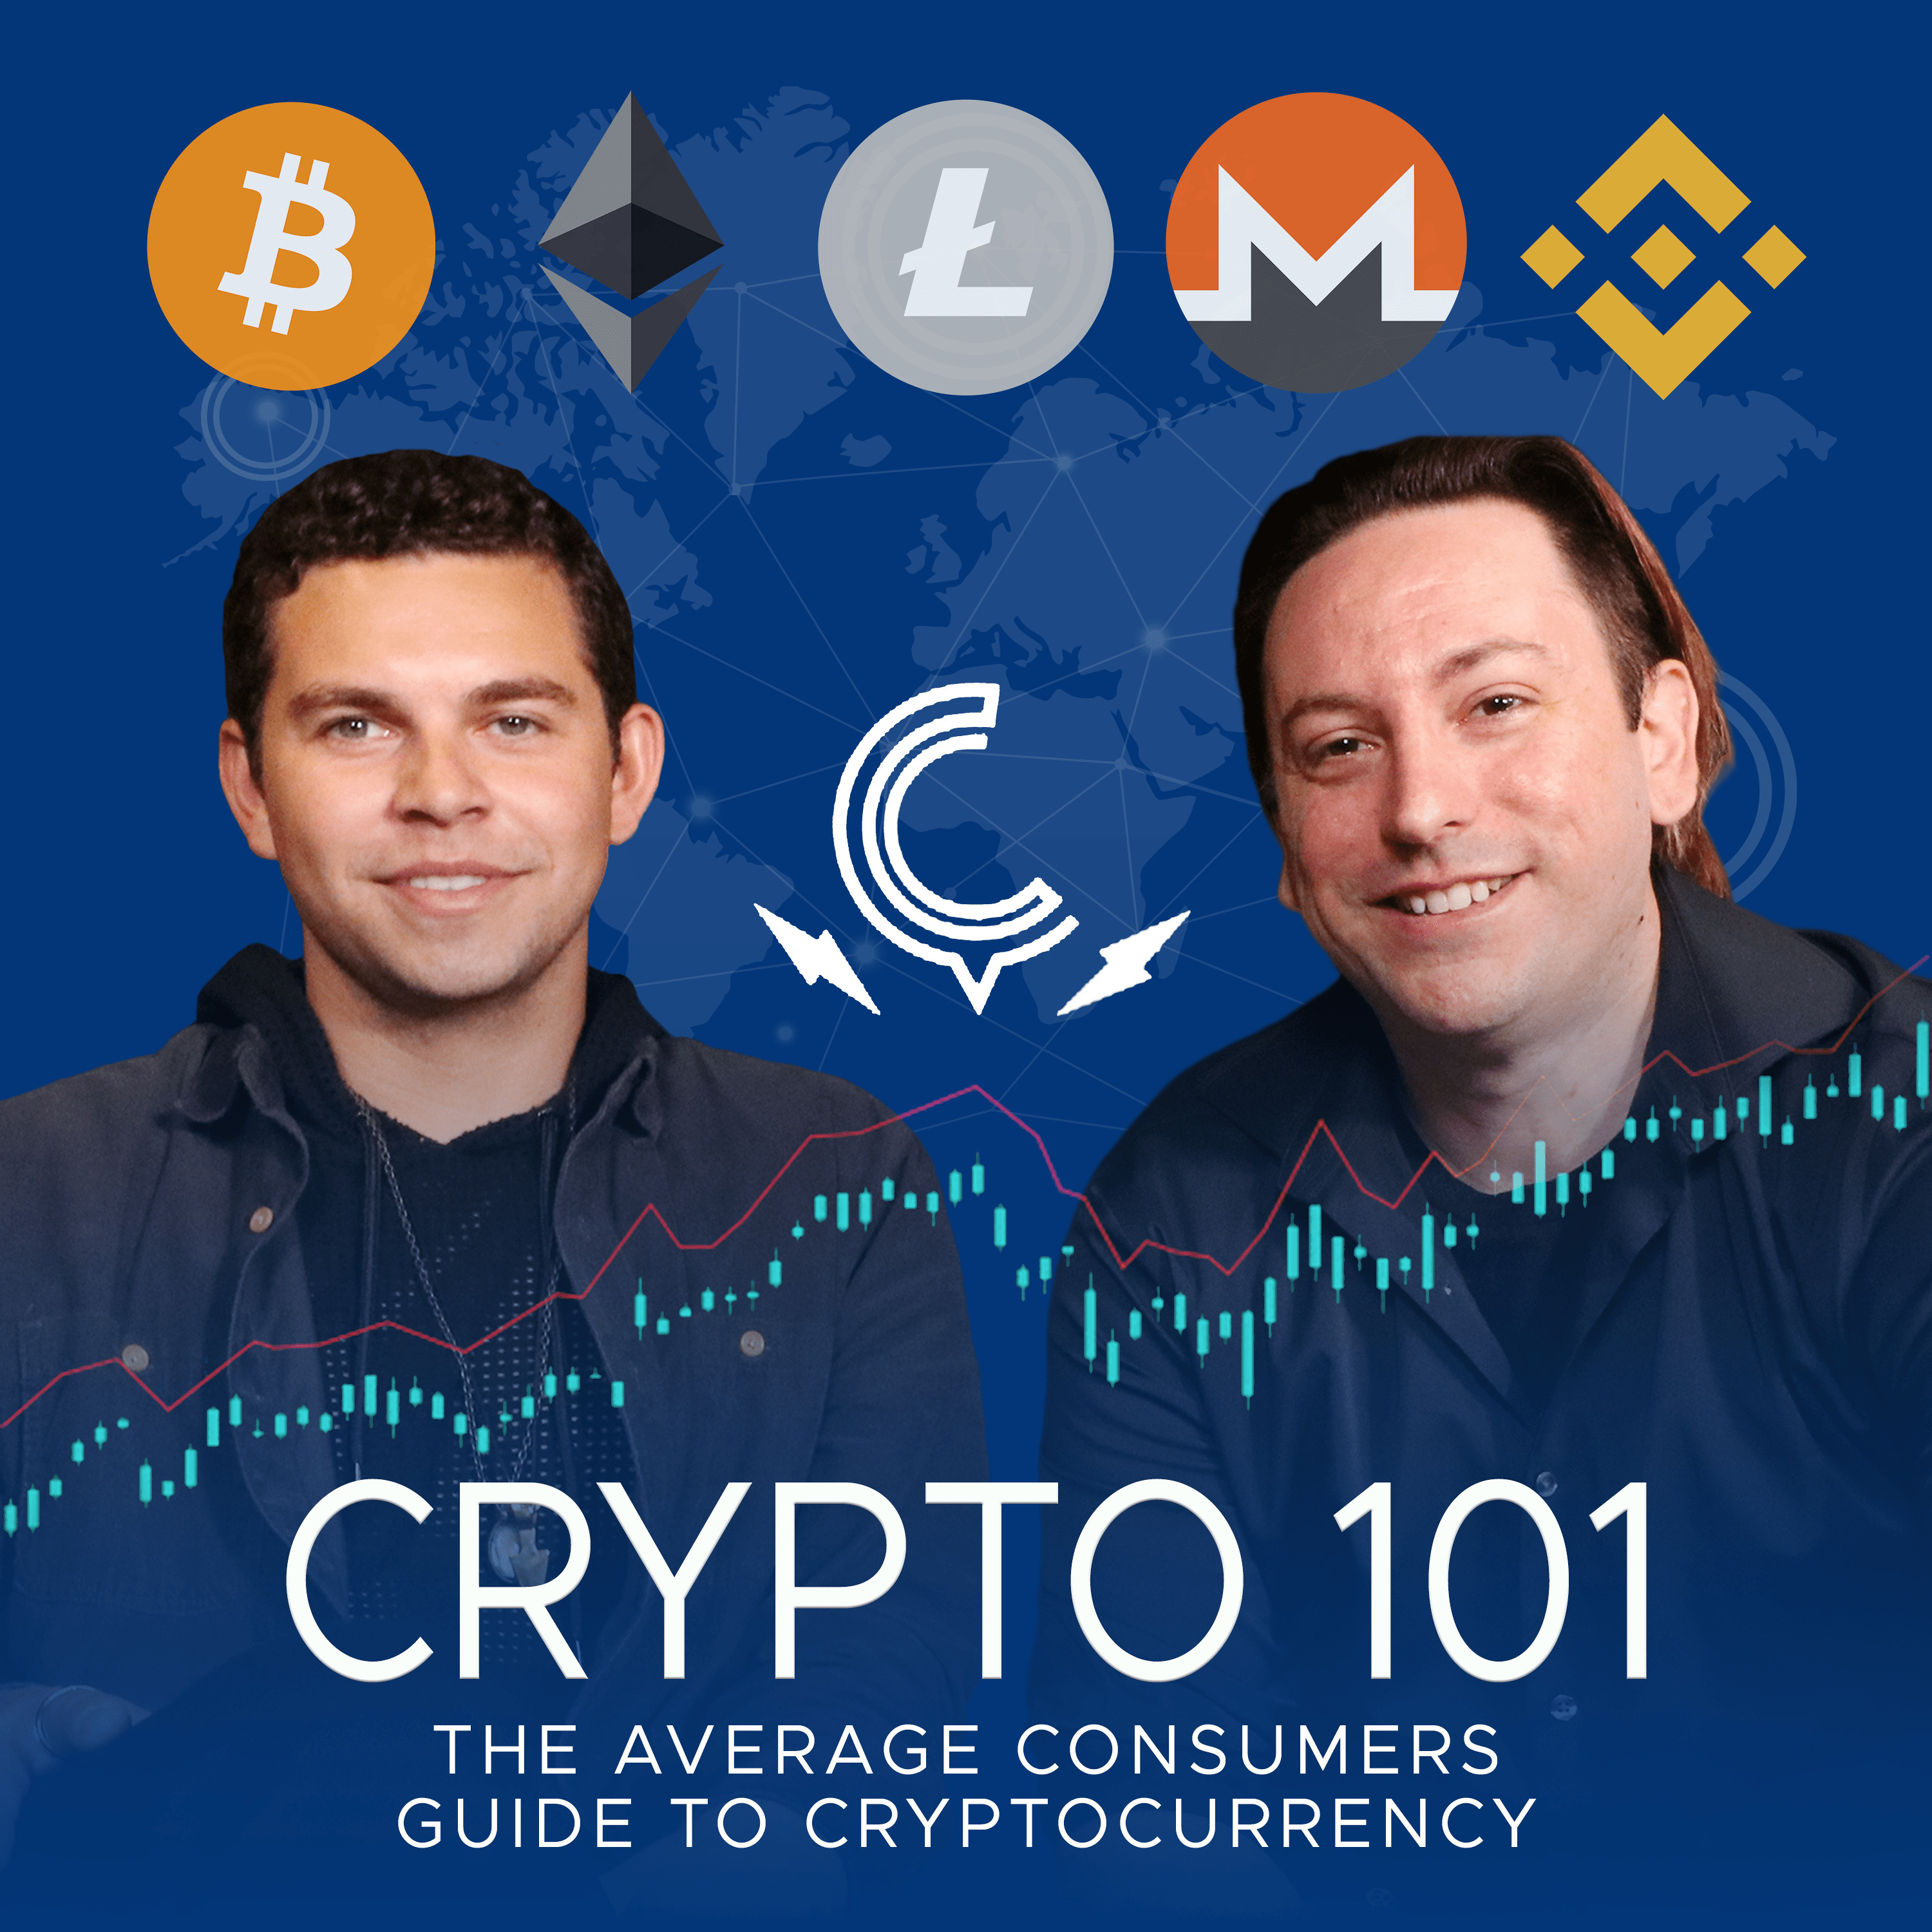 Ep. 152 - Fake community. Fake Volume. Fake Products. What is Real in ICO’s? w/ Ternio Founders